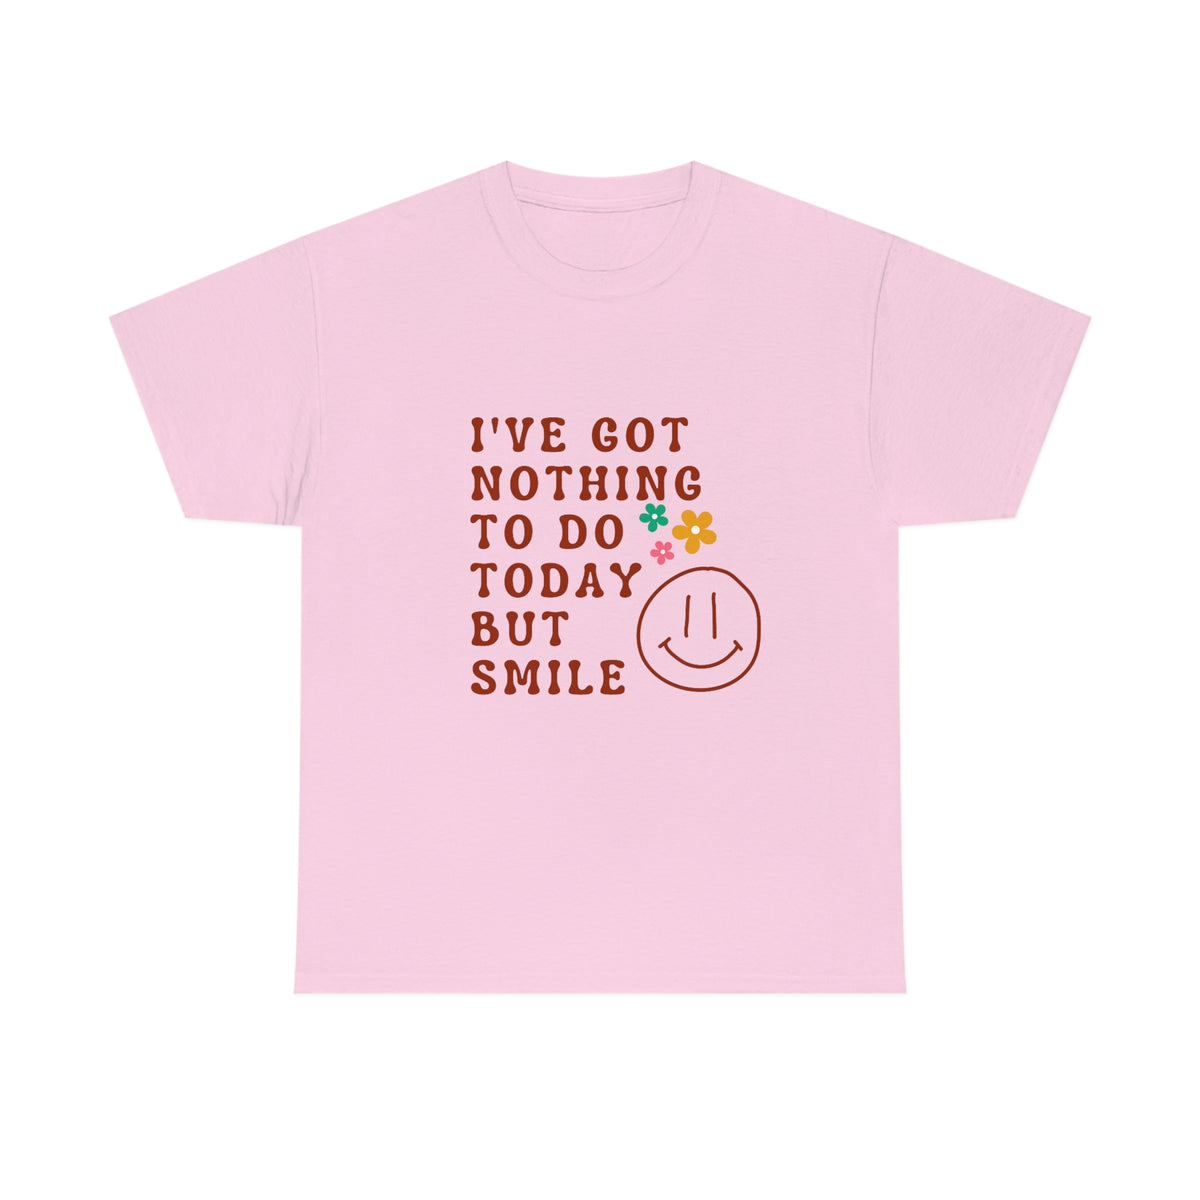 Nothing to do but Smile Tee, Simon + Garfunkle Top, Groovy Vibes Top, Aesthetic Vibes, Gift for Hippies, Paul Simon Pullover